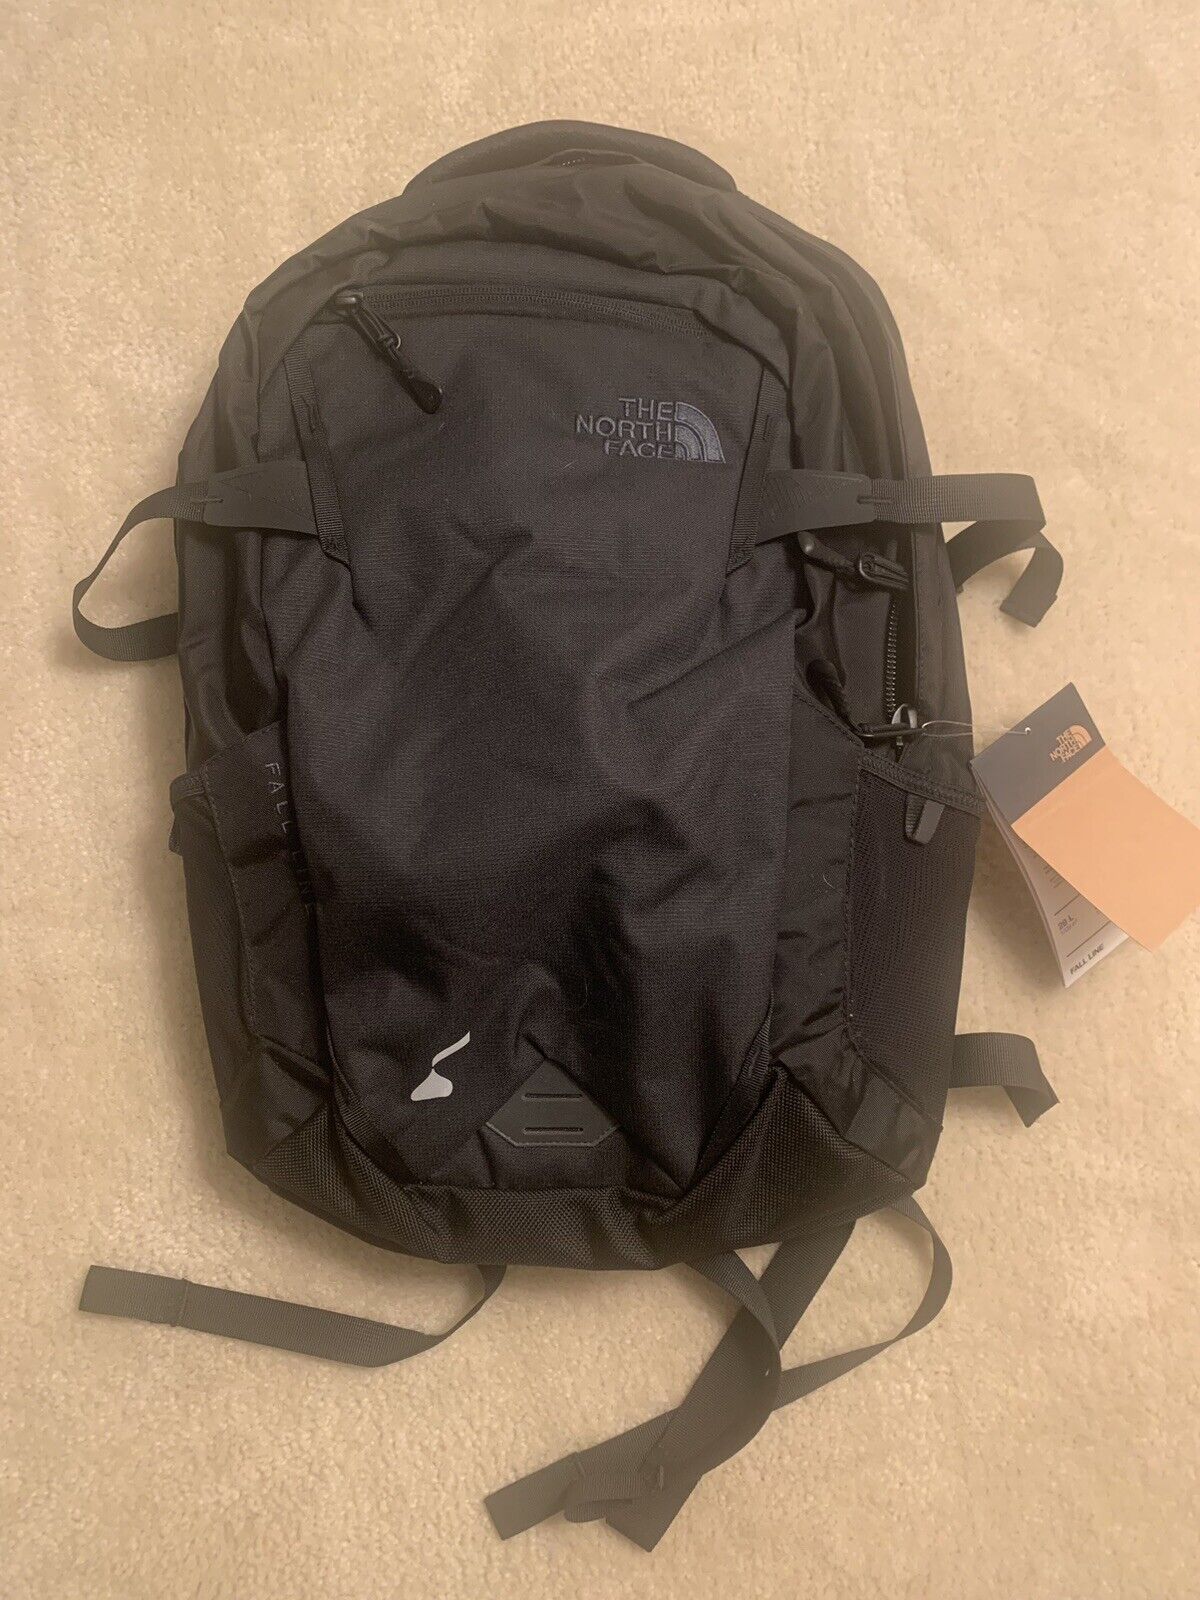 North Face Laptop Backpack Black Fall Line - HAS HERSHEY KISS LOGO